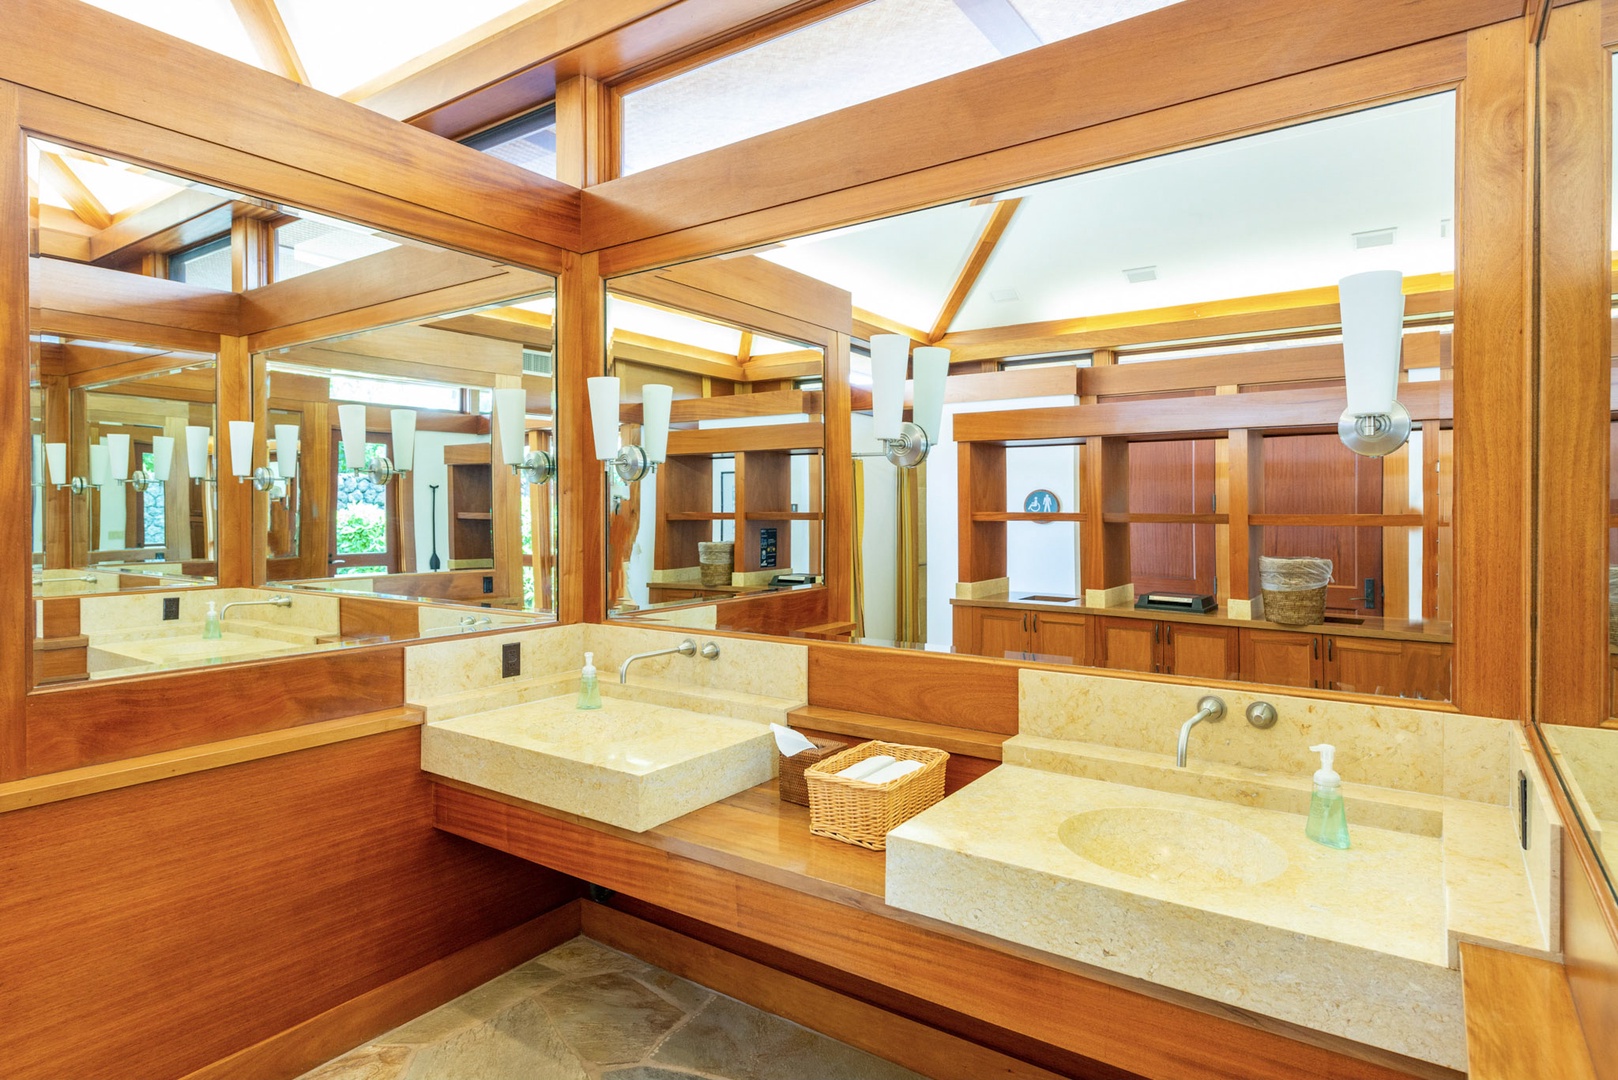 Kamuela Vacation Rentals, 3BD Na Hale 3 at Pauoa Beach Club at Mauna Lani Resort - The bathrooms at Pauoa Beach Club Amenities Center are stocked for your use